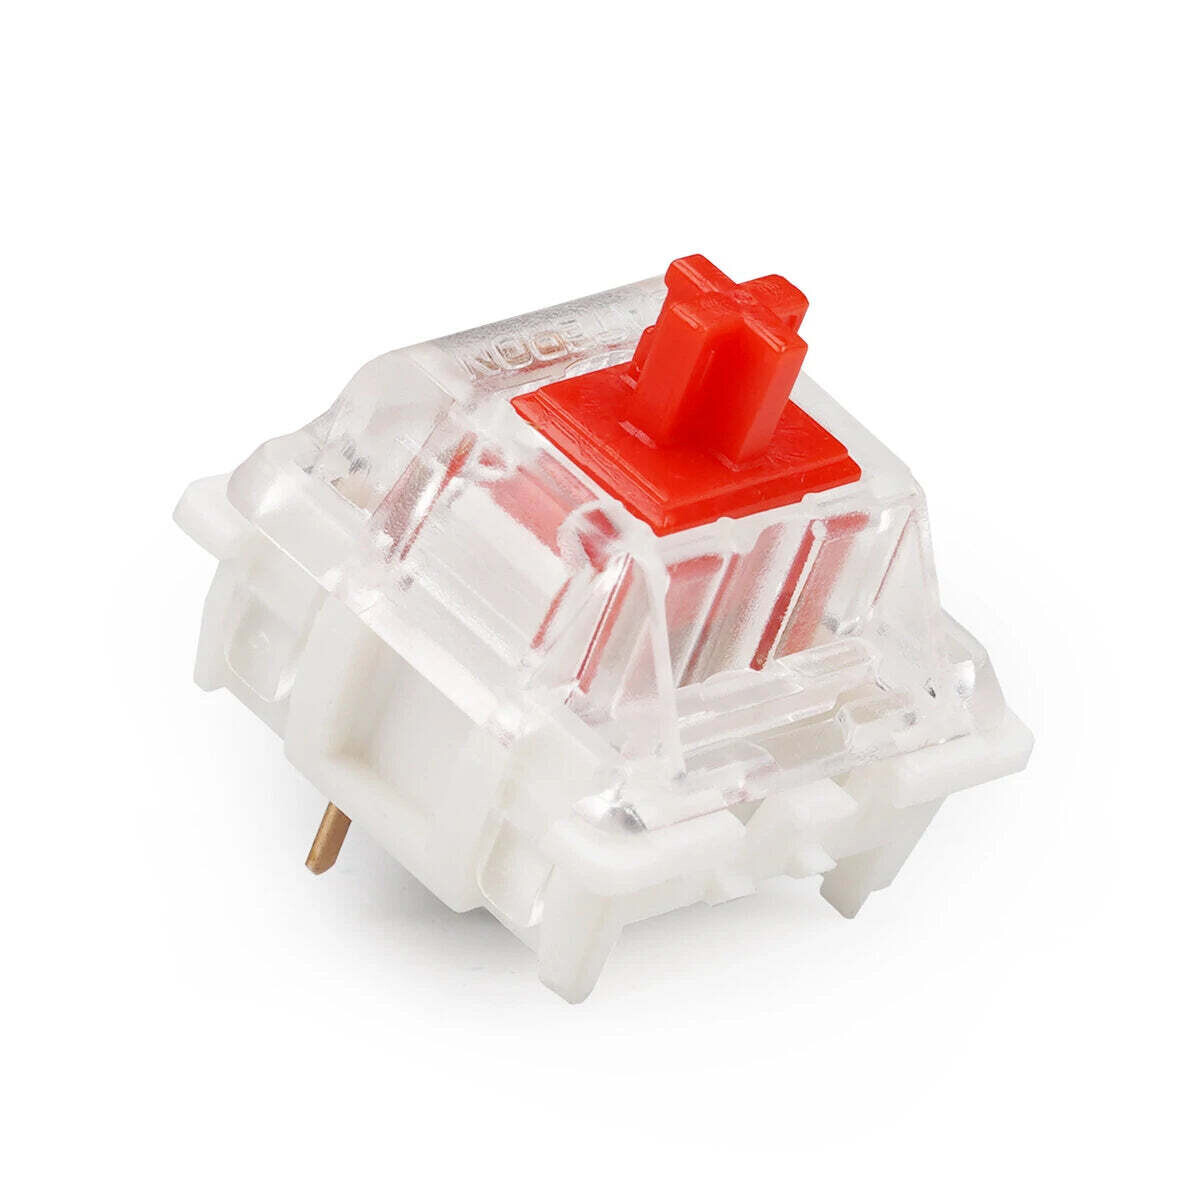 Let's Split Key Switch Pack Gateron Silent Red (Plate Mount)